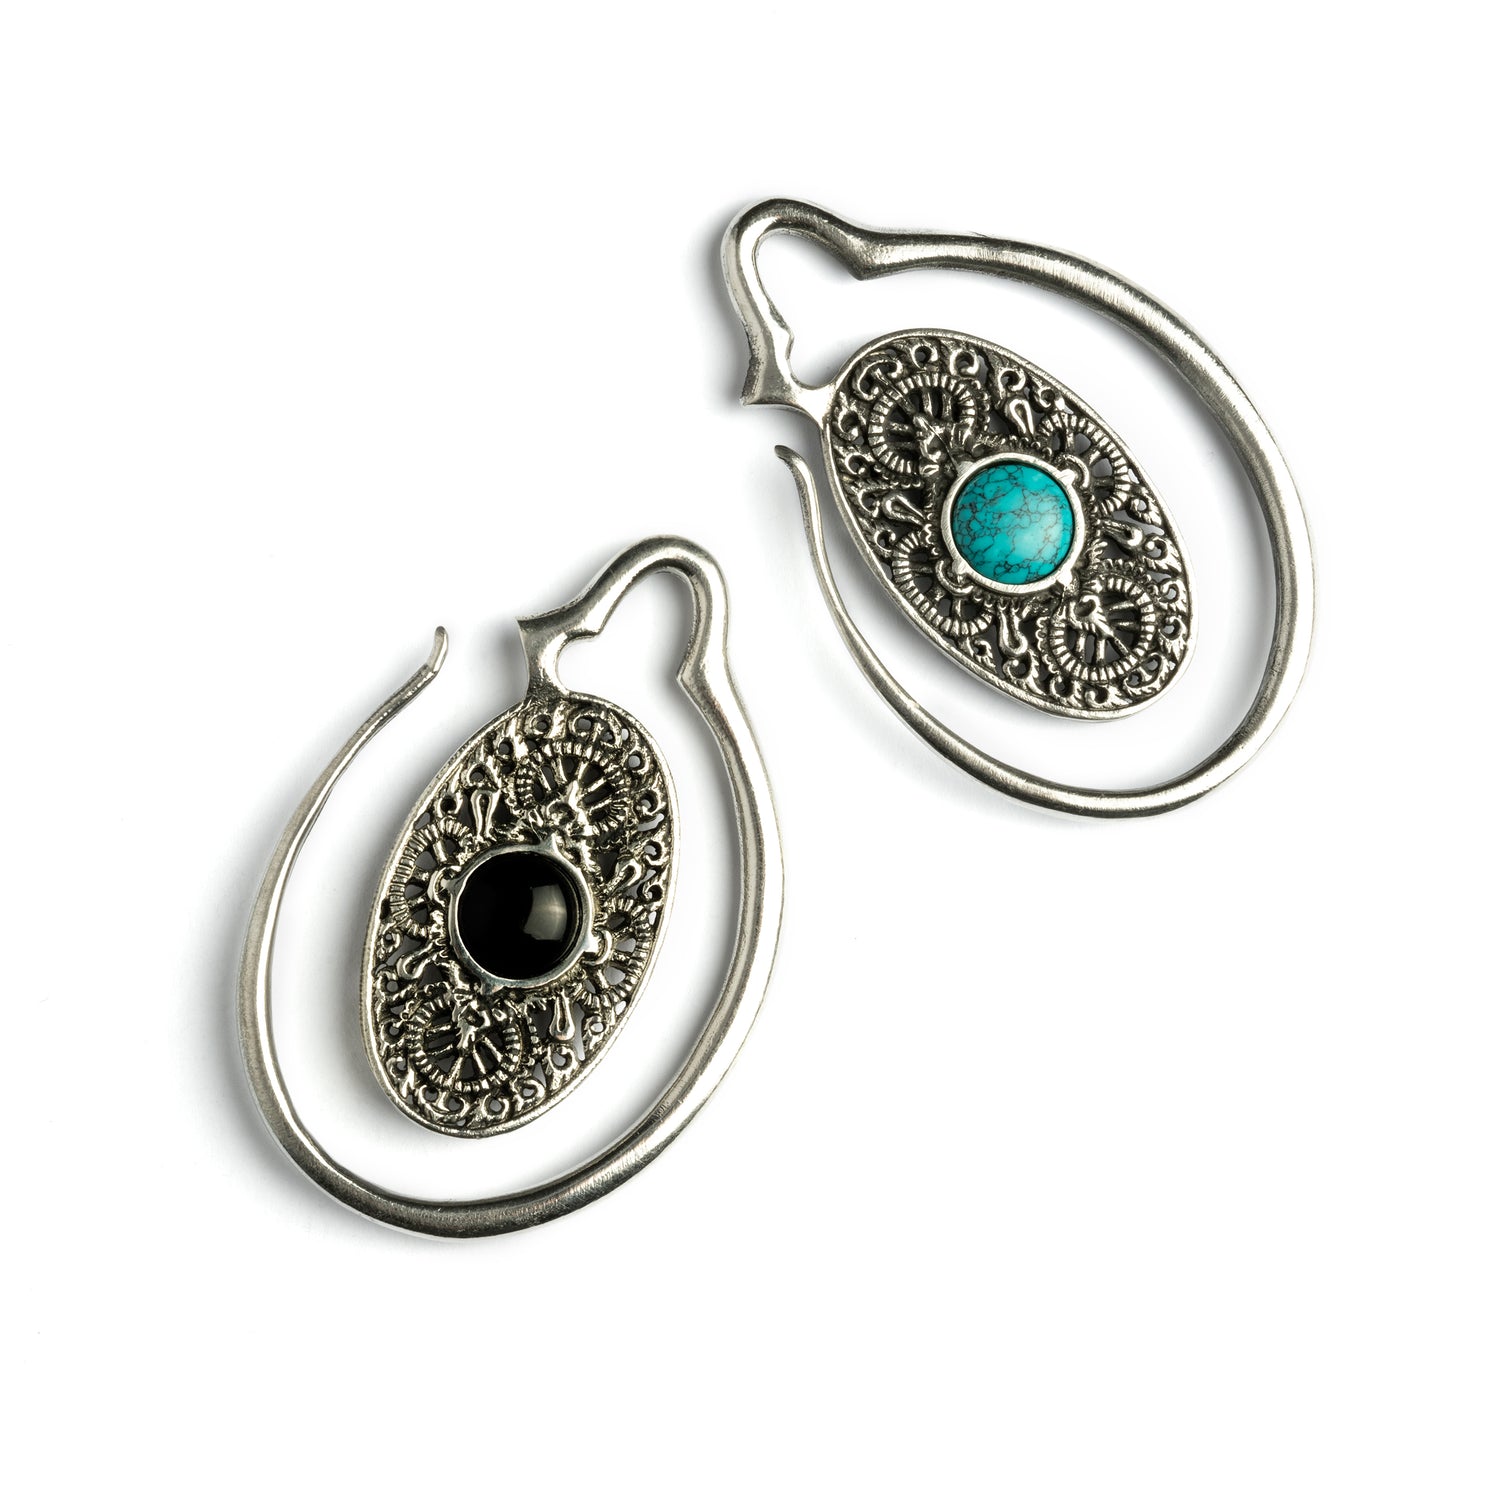 large ear weights hangers, silver colour oval shaped with intricate filigree pattern and turquoise/onyx